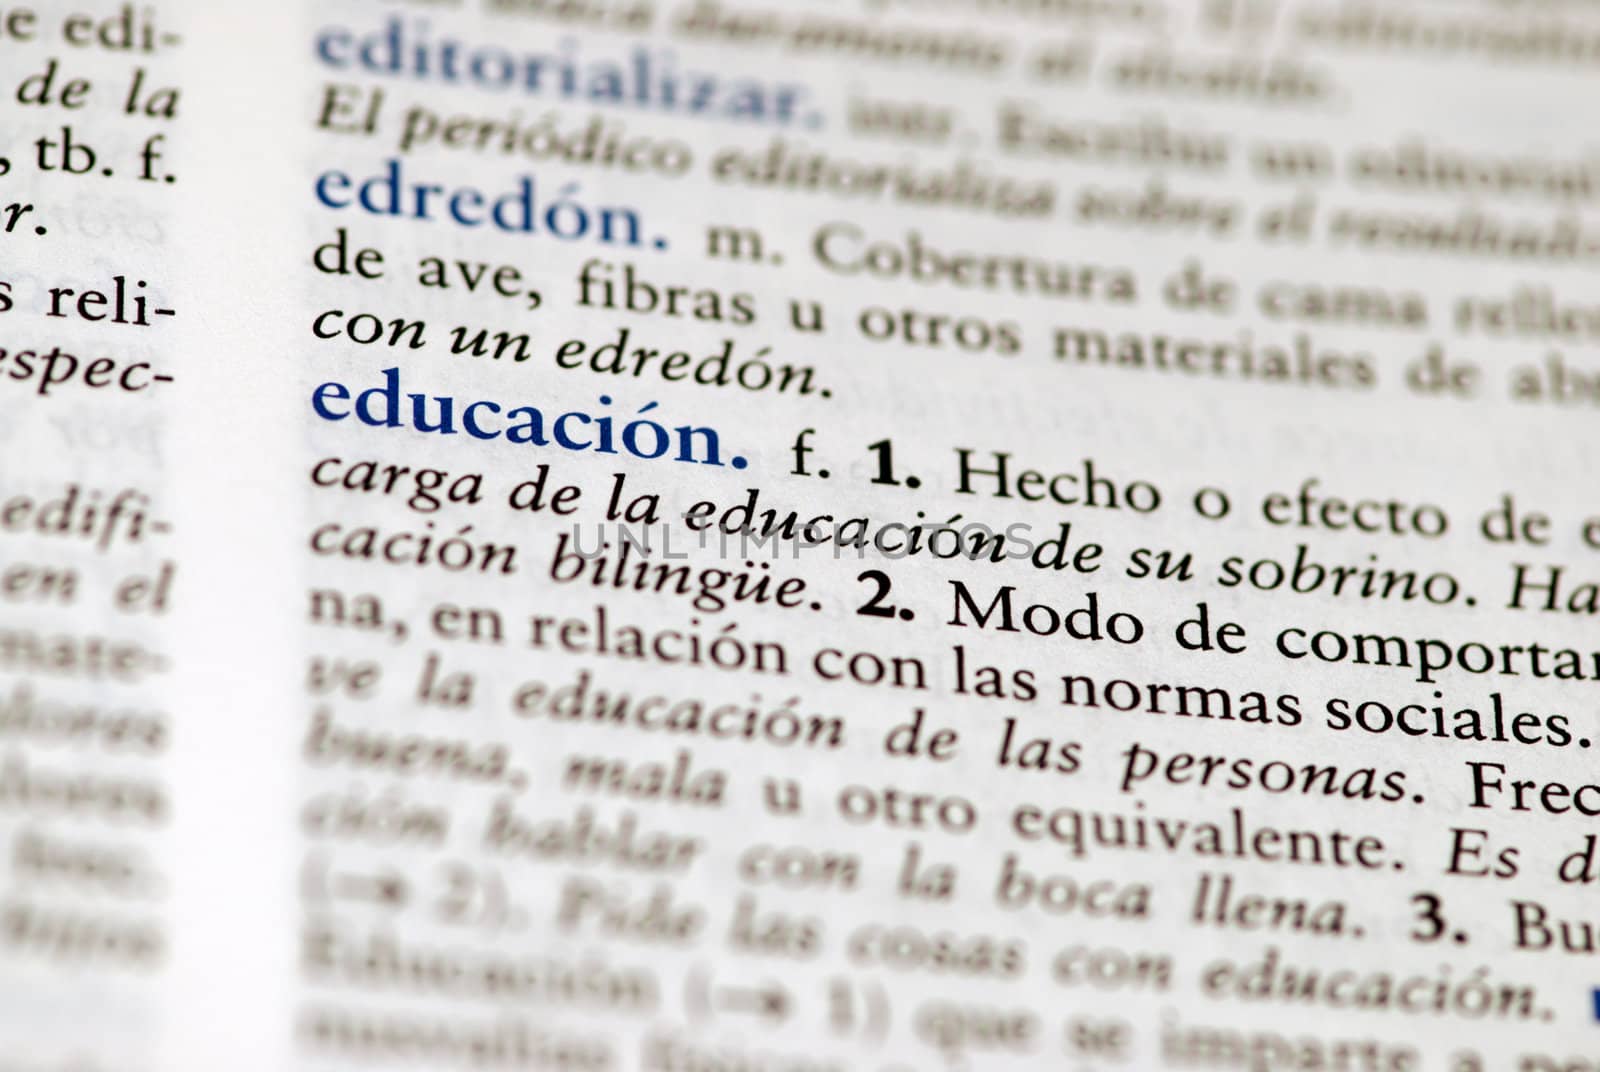 Spanish dictionary definition of the word education with focus on education and a hallow field depth.